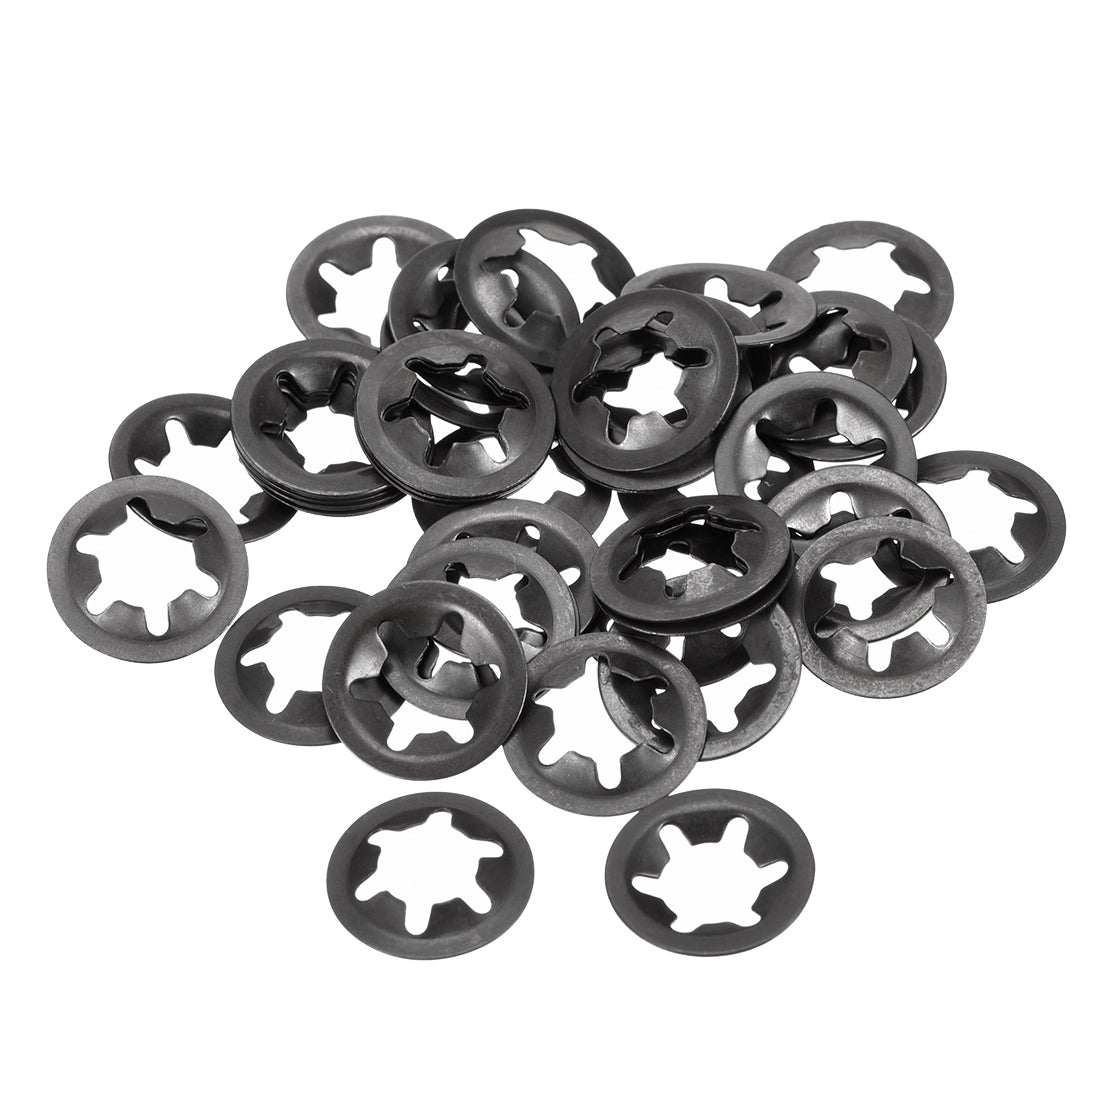 Uxcell Uxcell M8 Internal Tooth Star Locking Washer 7mm I.D. 18mm O.D. Lock Washers Push On Locking Speed Clip, 65Mn Black Oxide Finish 40pcs